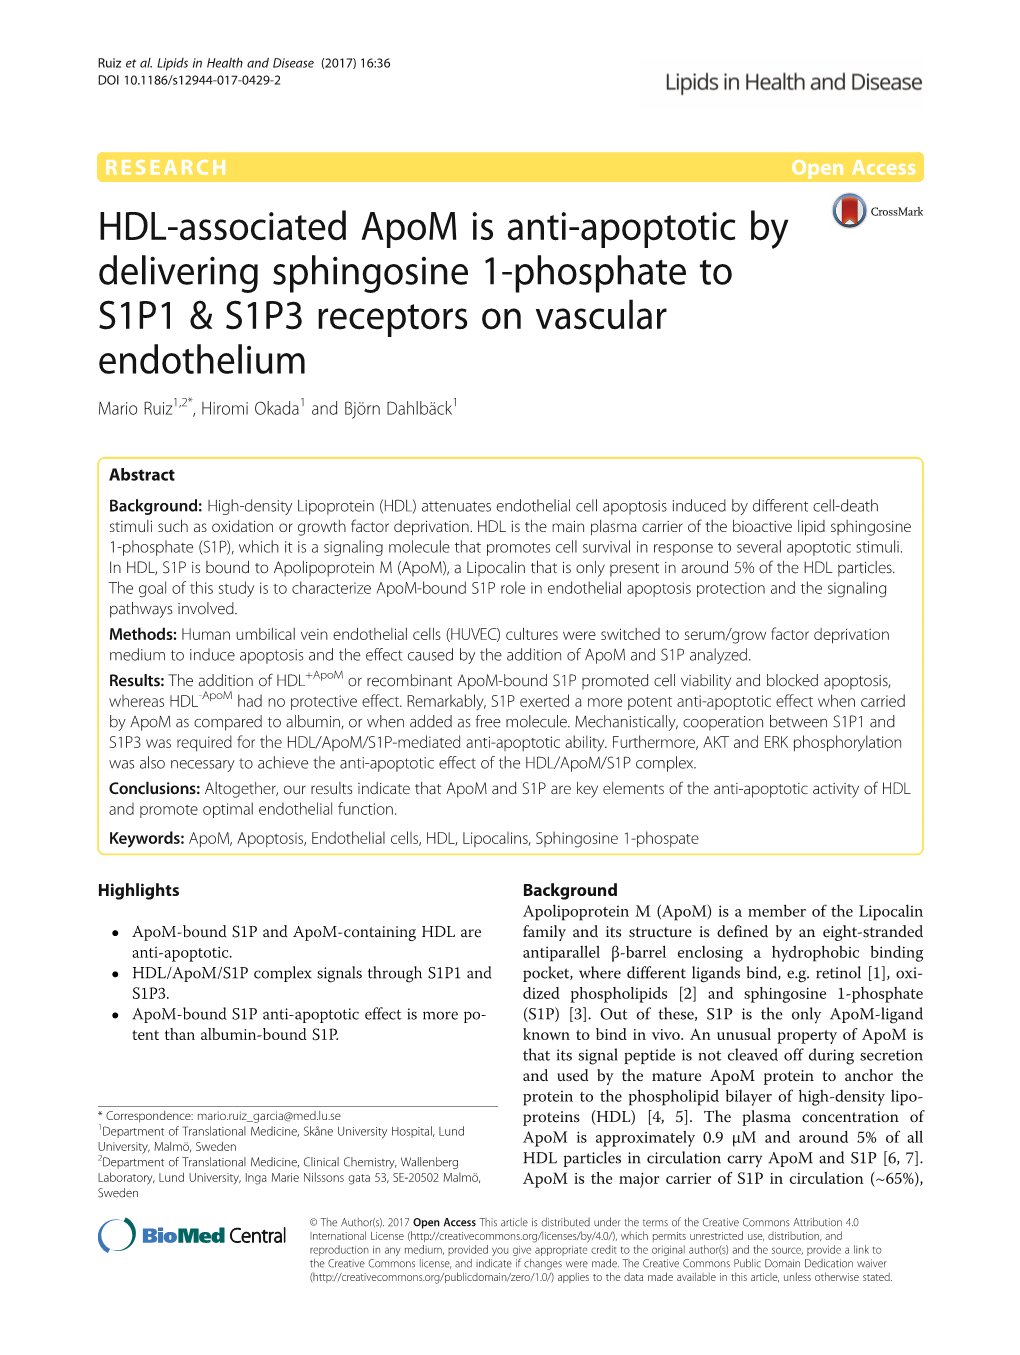 HDL-Associated Apom Is Anti-Apoptotic by Delivering